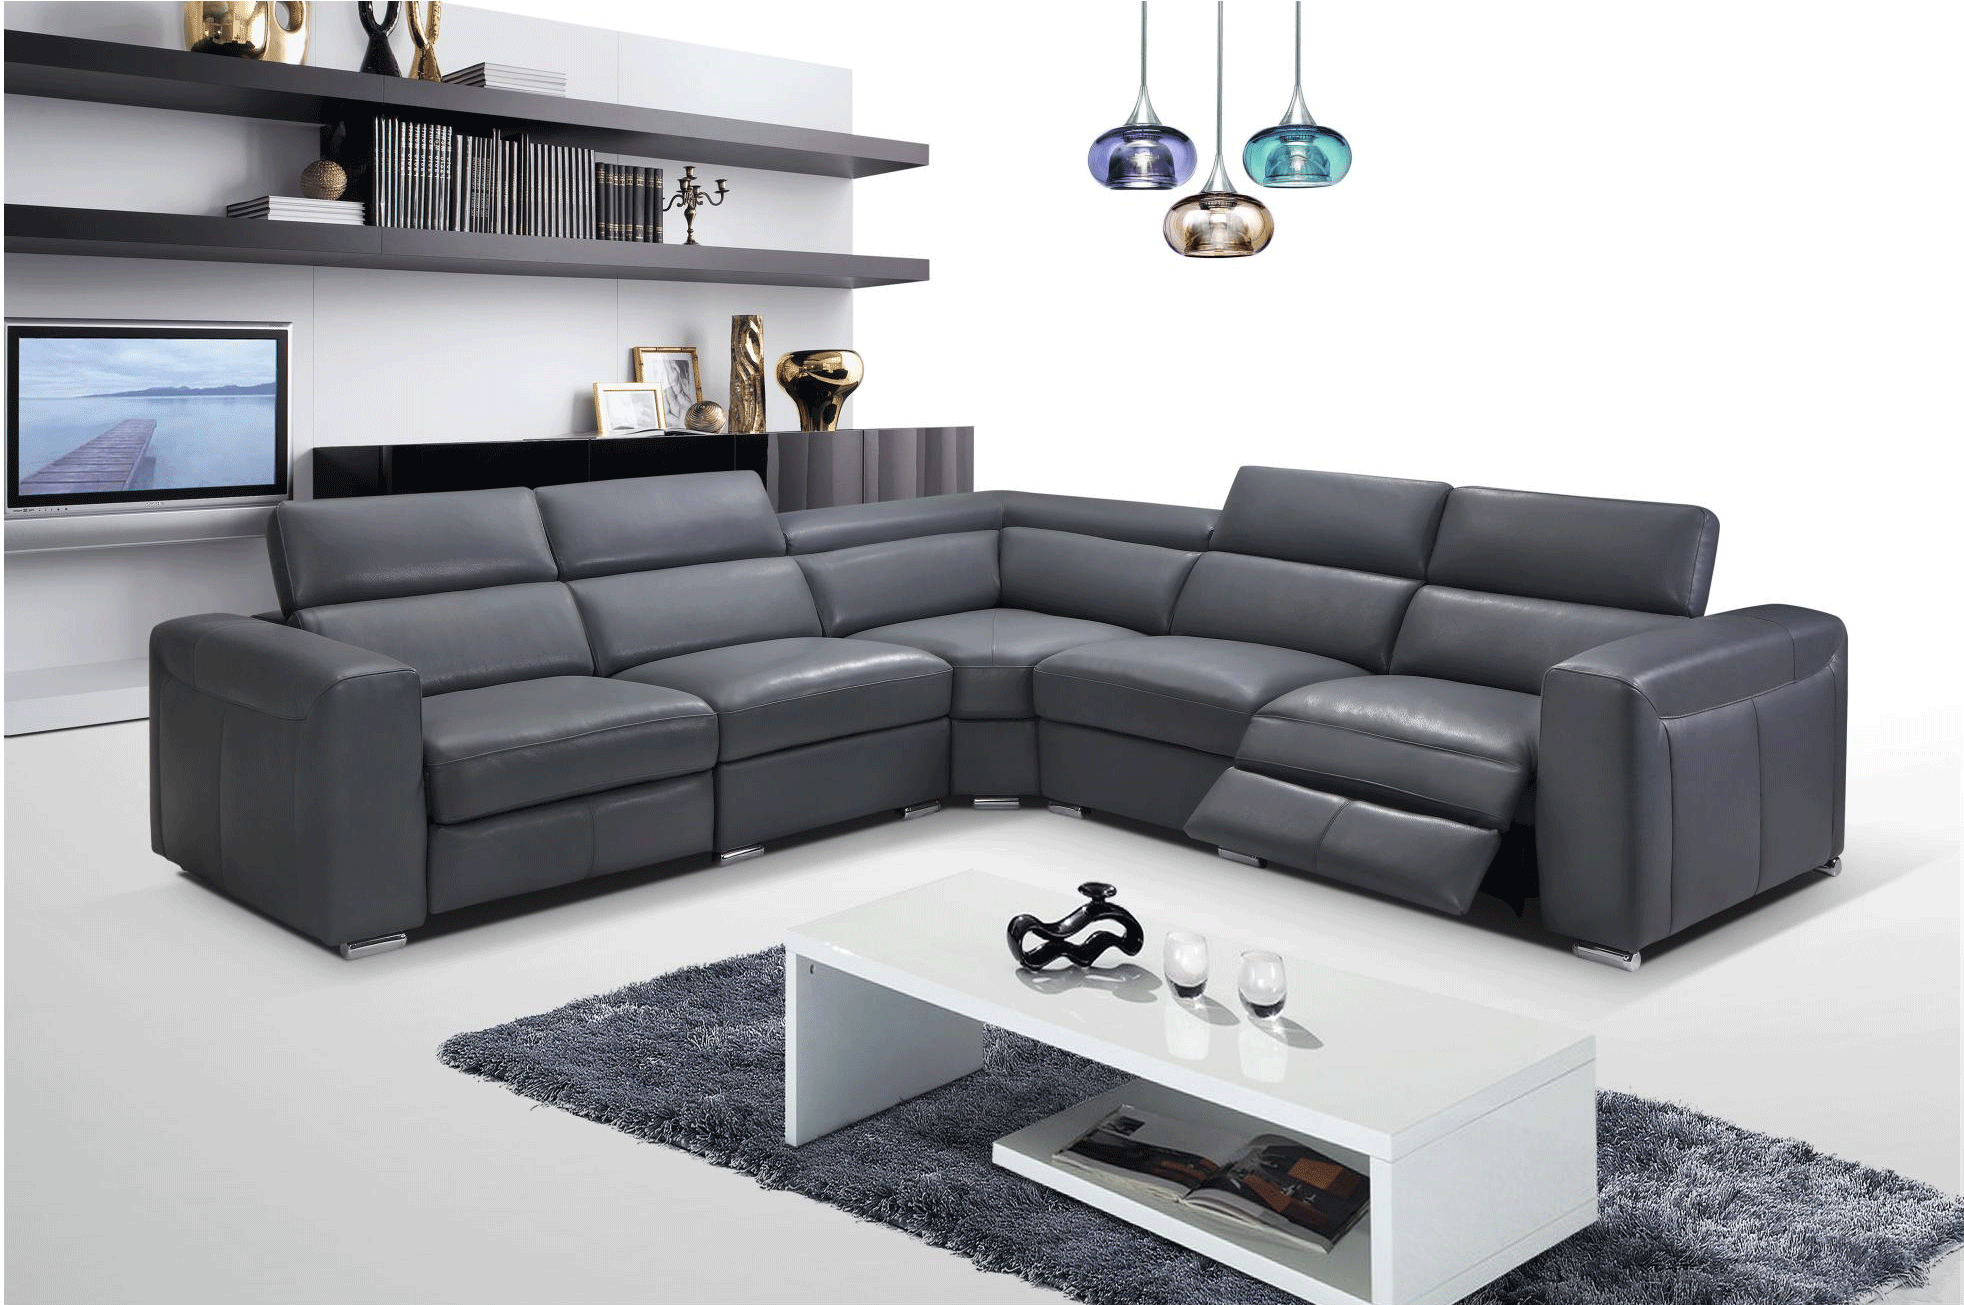 Living Room Furniture Sofas Loveseats and Chairs 2919 Sectional w/ recliners